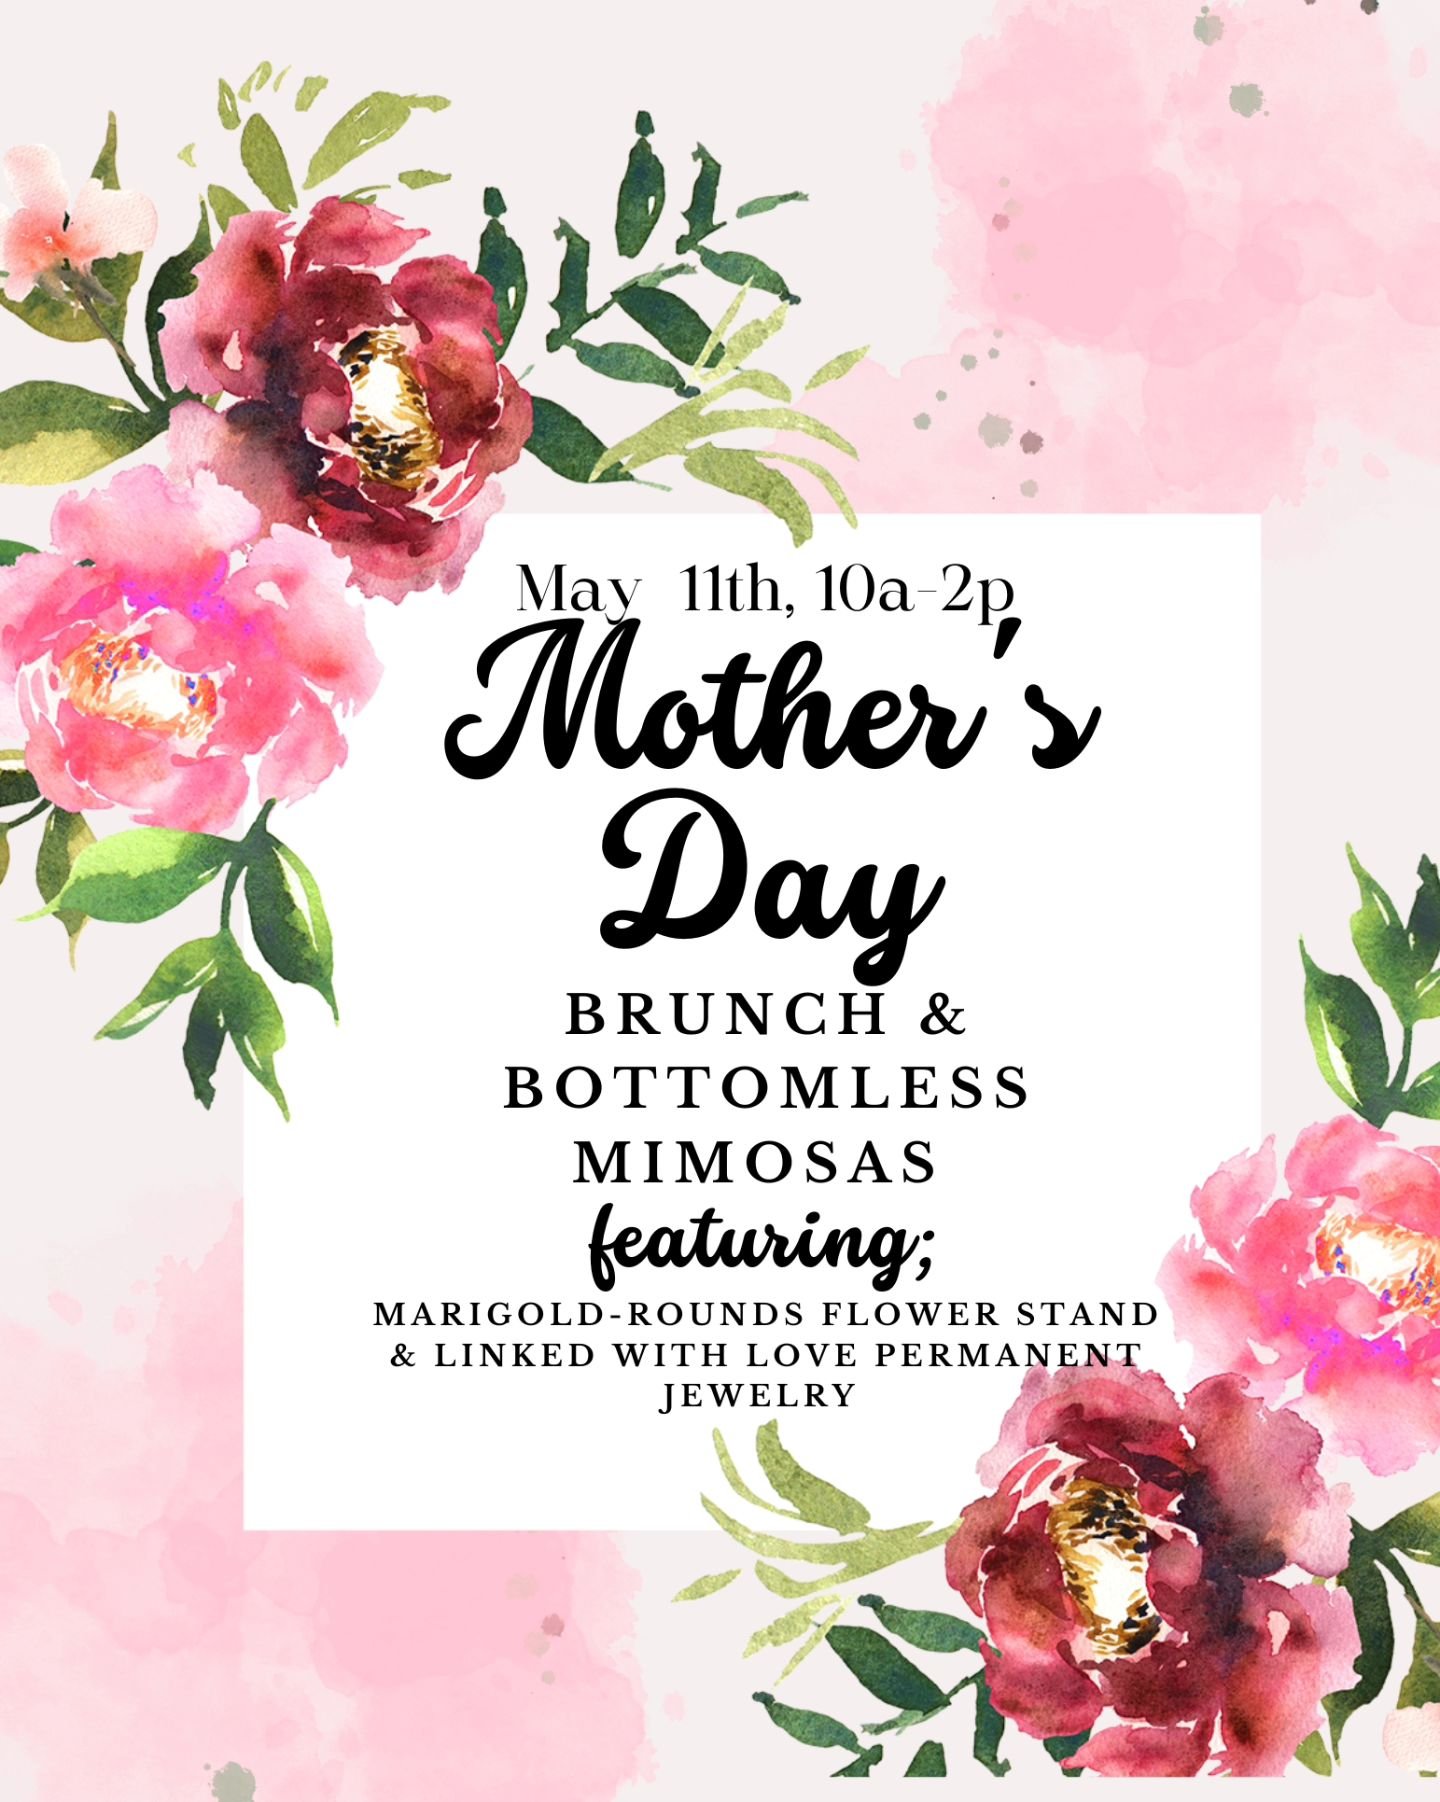 5&bull;11&bull;24
be there,
or be ■

set up an appointment with @linkdwlove, 
and get 5% off of your scc brunch.

pre-order momma's bouquet, 
5% off of your scc brunch.
💐
4025 Pontoon Road